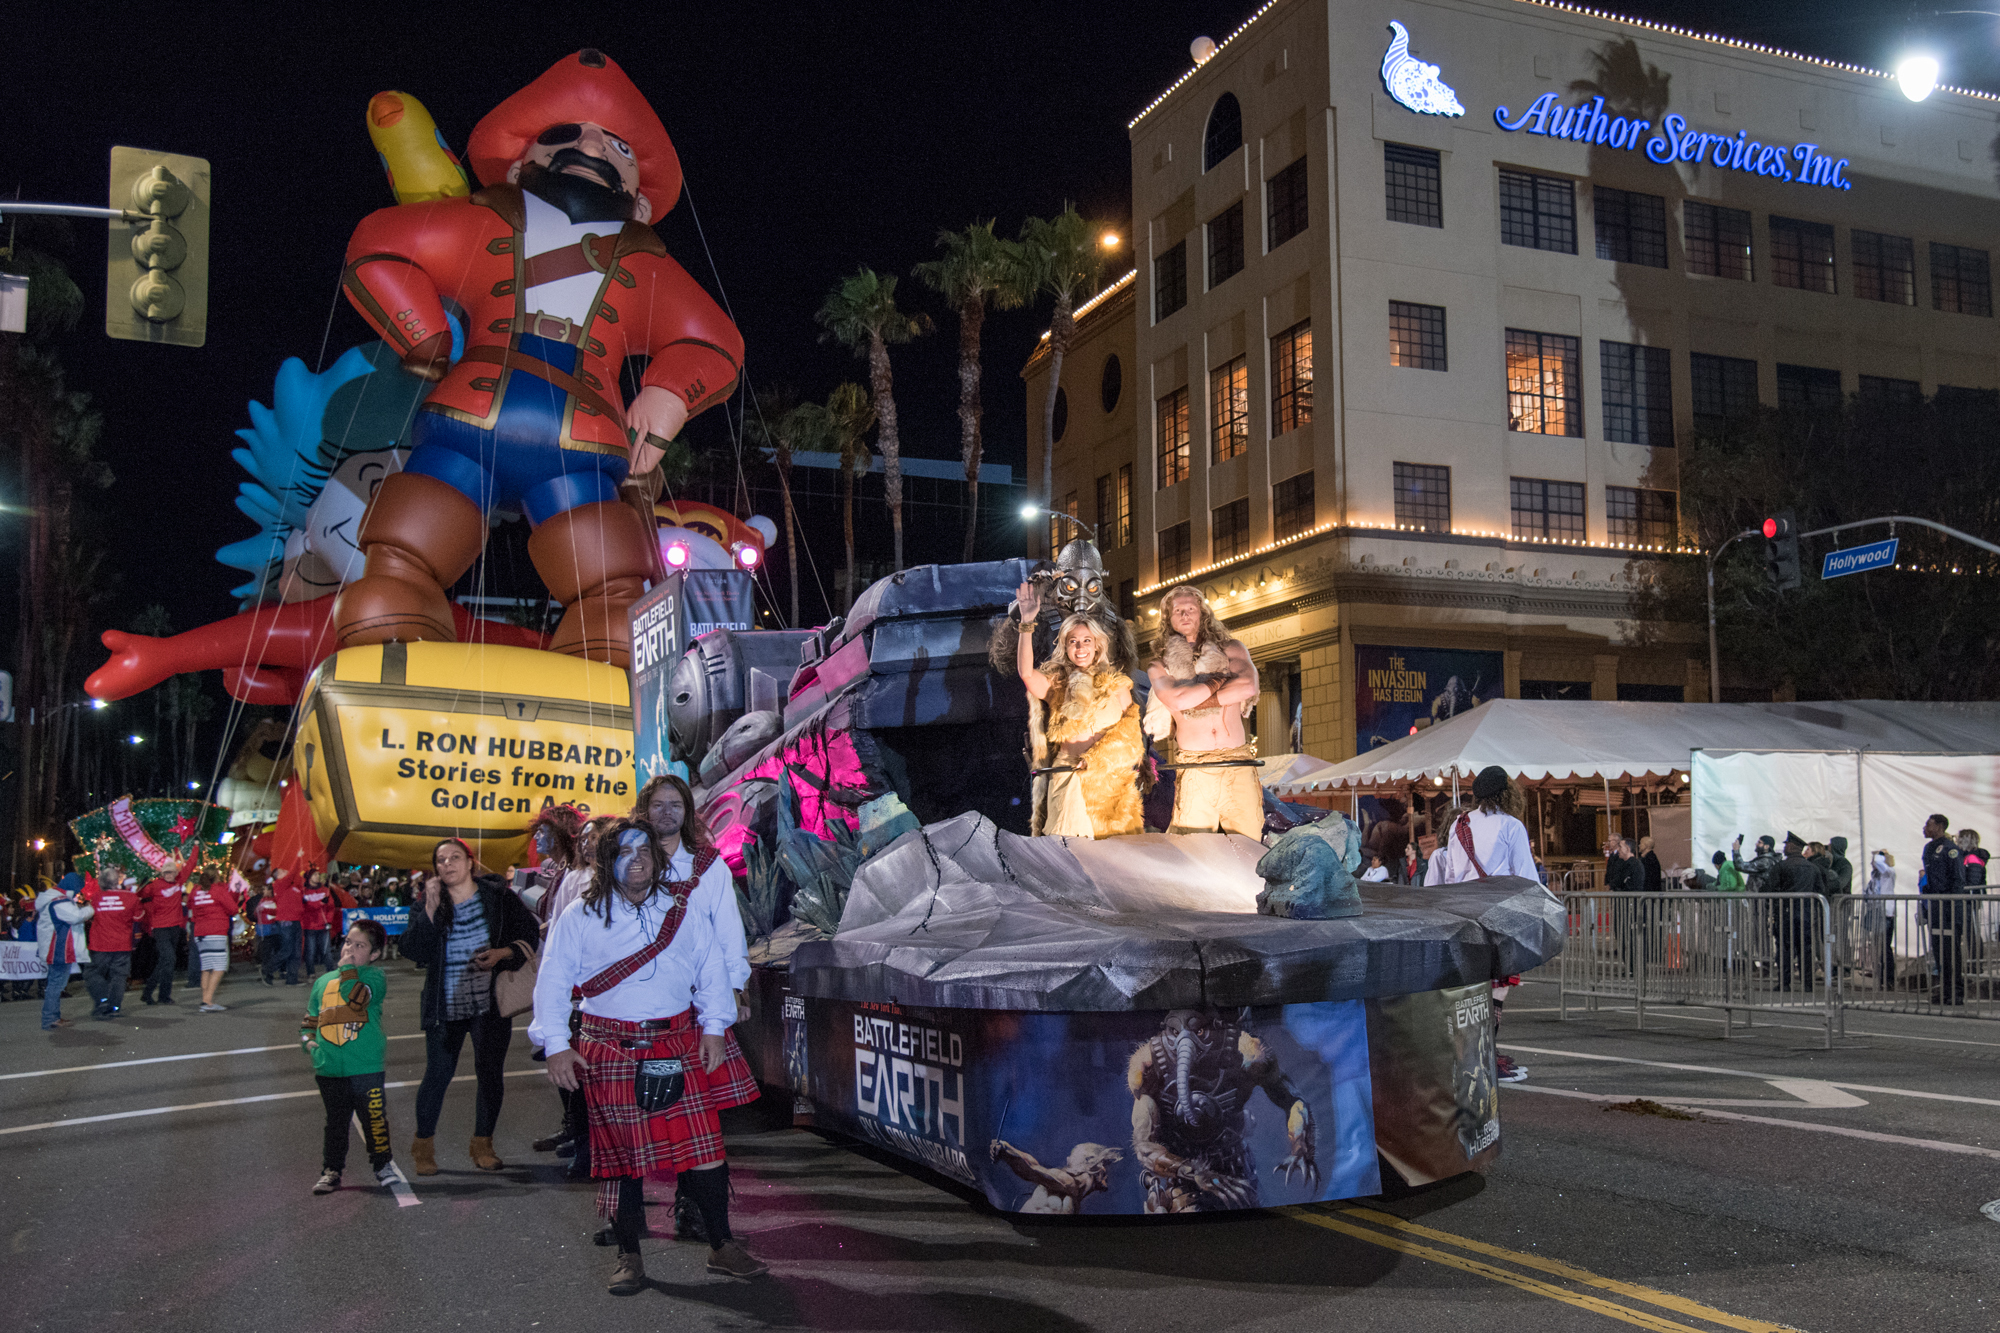 The Battlefield Earth Float, 2016 Hollywood Christmas Parade